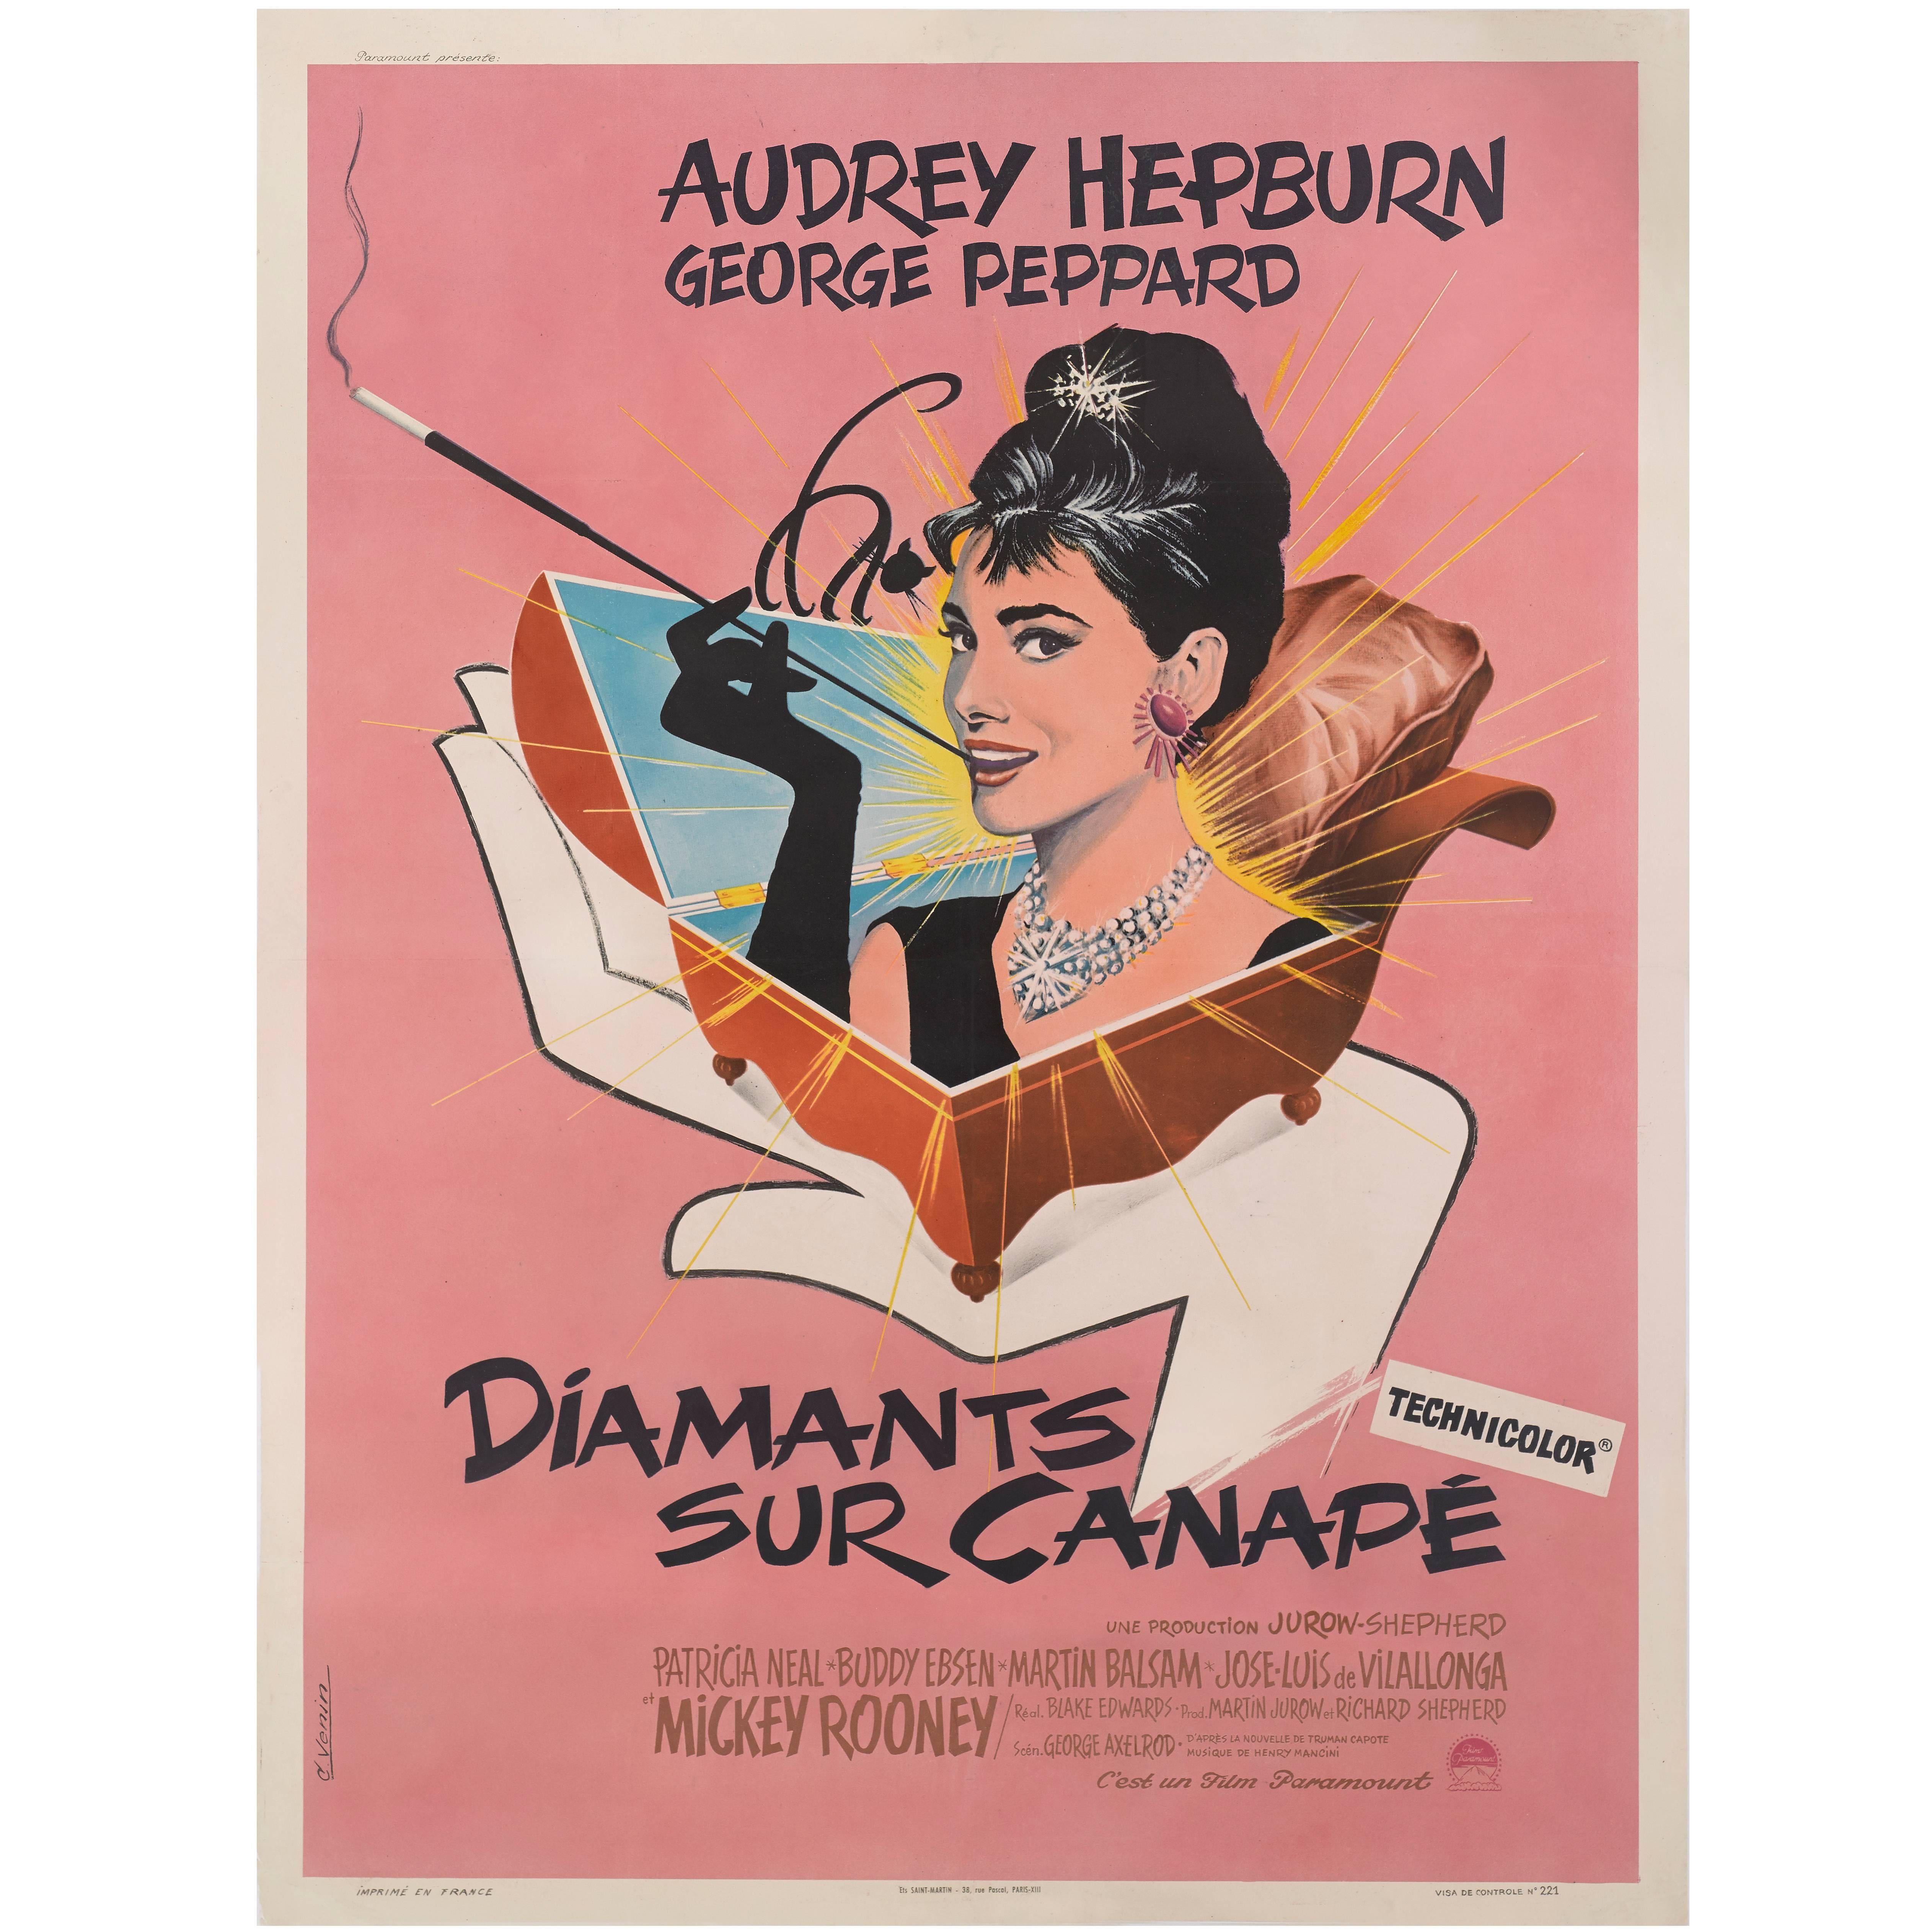 "Breakfast at Tiffany's / Diamants sur Canapés" Original French Movie Poster